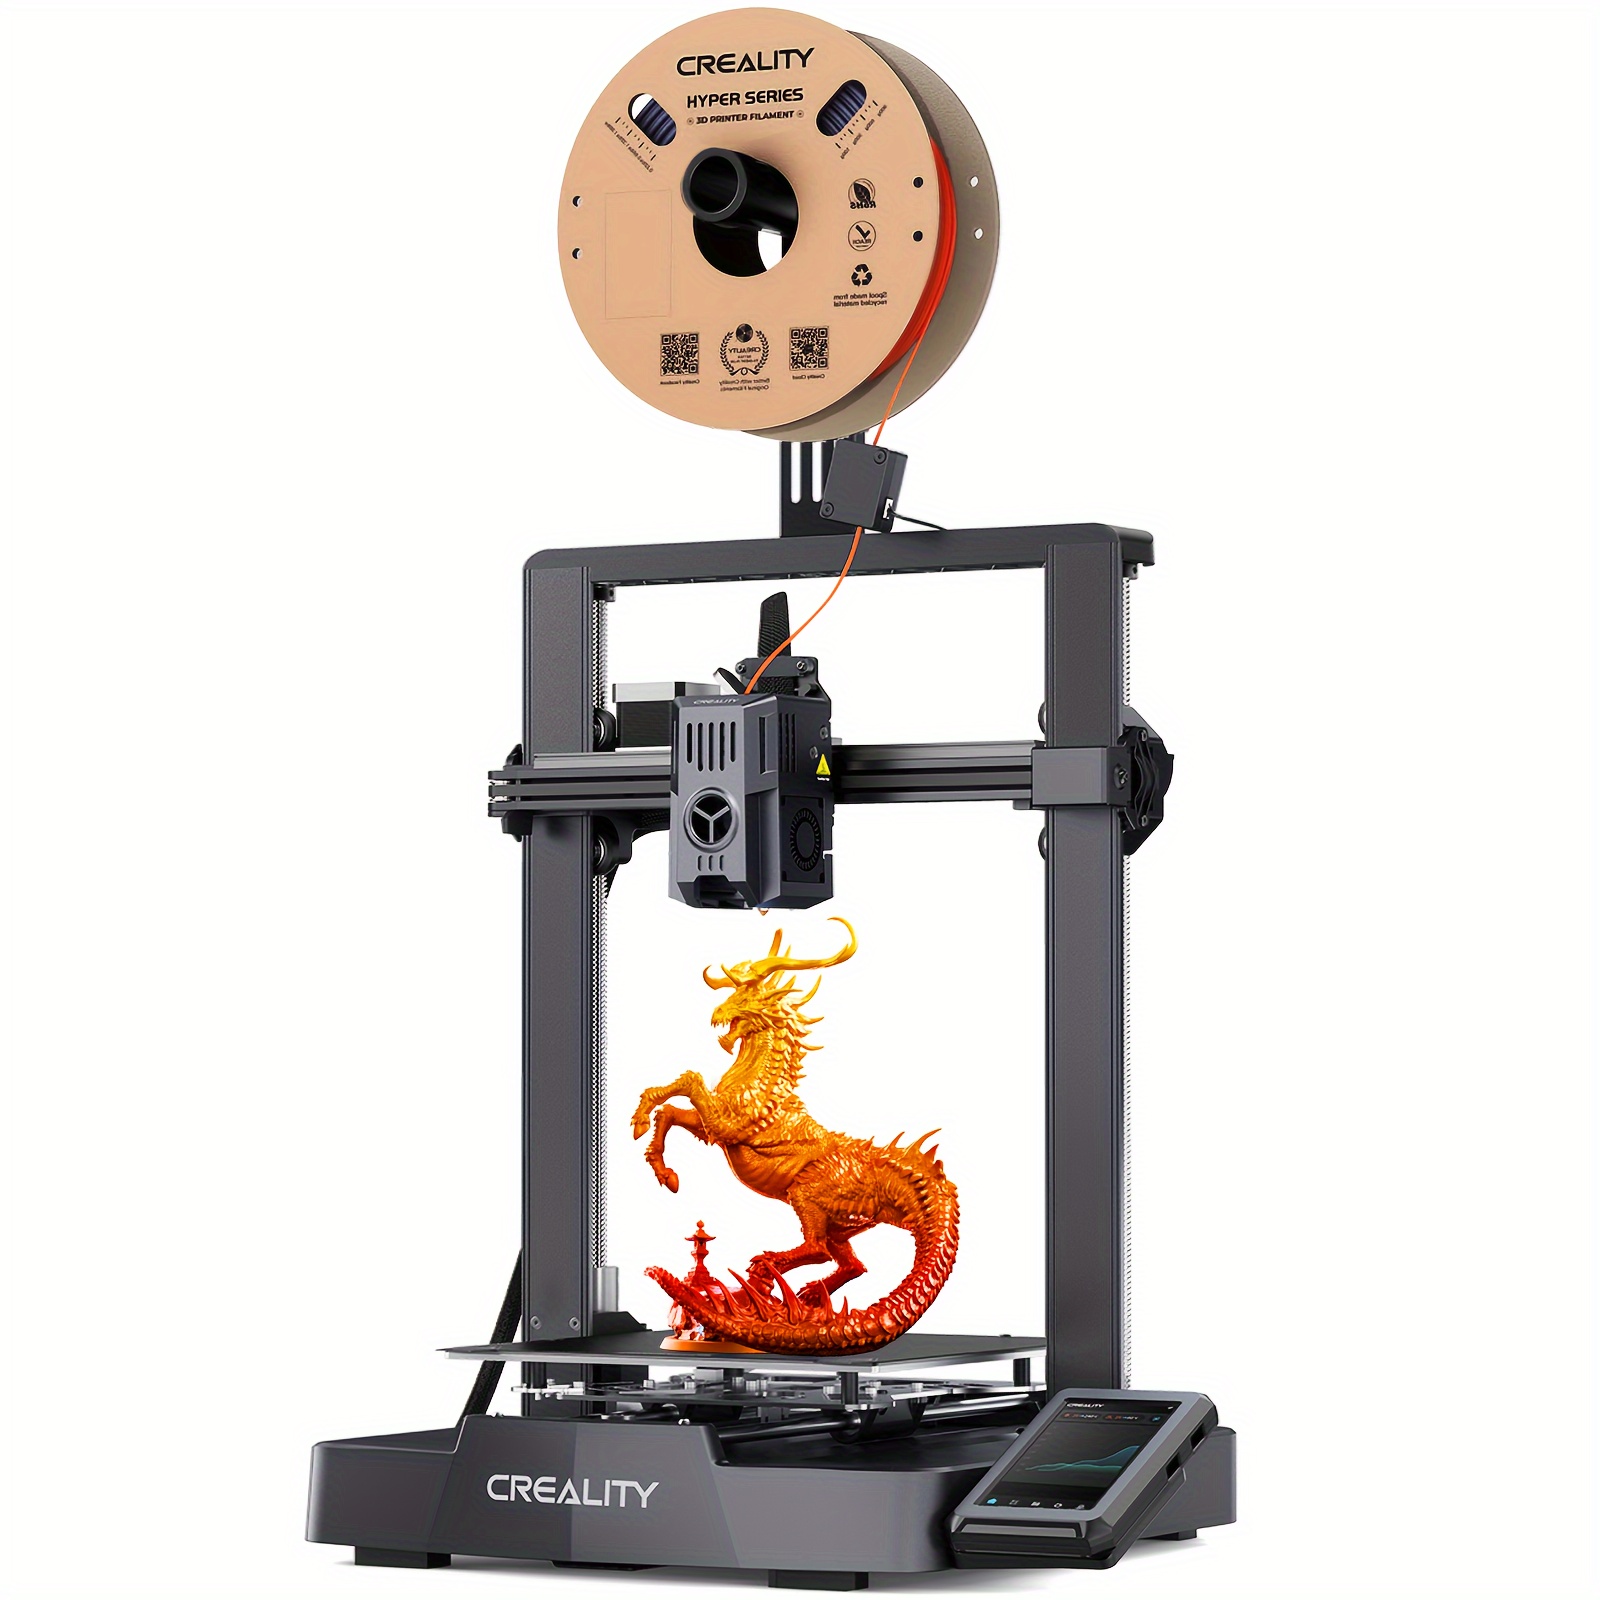 

Creality 3 V3 Ke 3d Printer 500mm/ S High- Speed Printing Smarter And Faster Cr Touch Auto Leveling Extruder Superior Ceramic Hotend X-axis Linear Rail Print Size 8.66* 8.66* 9.84in